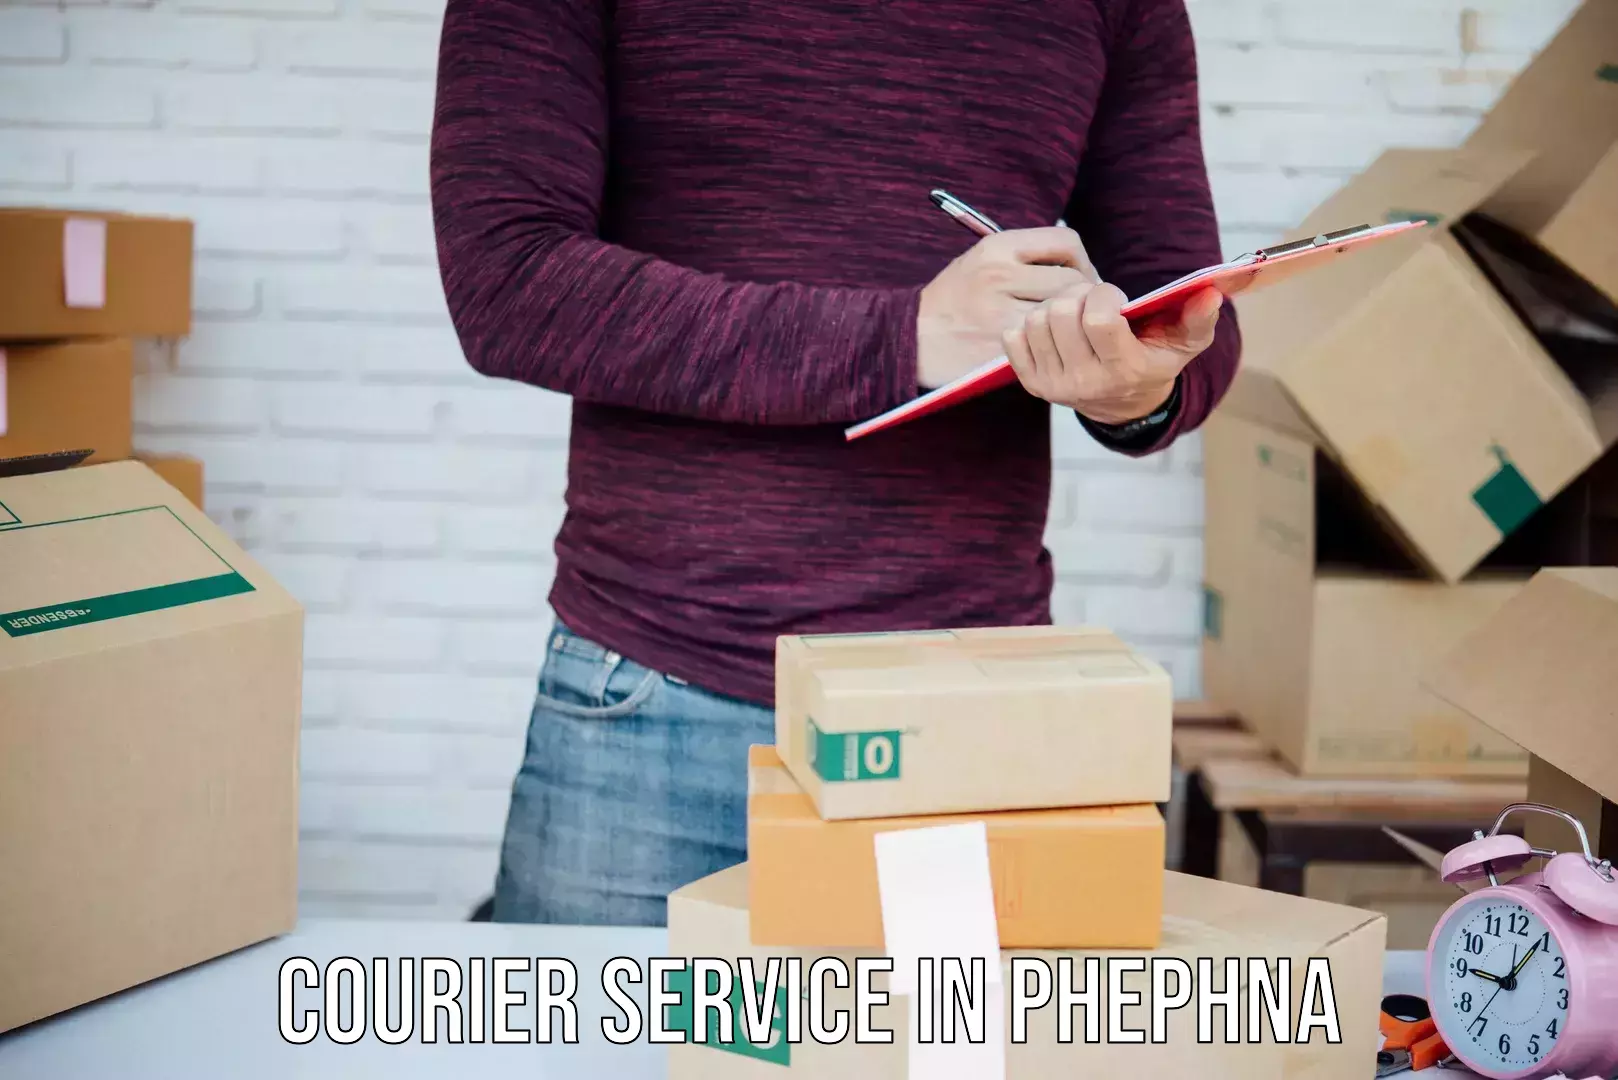 Rapid shipping services in Phephna